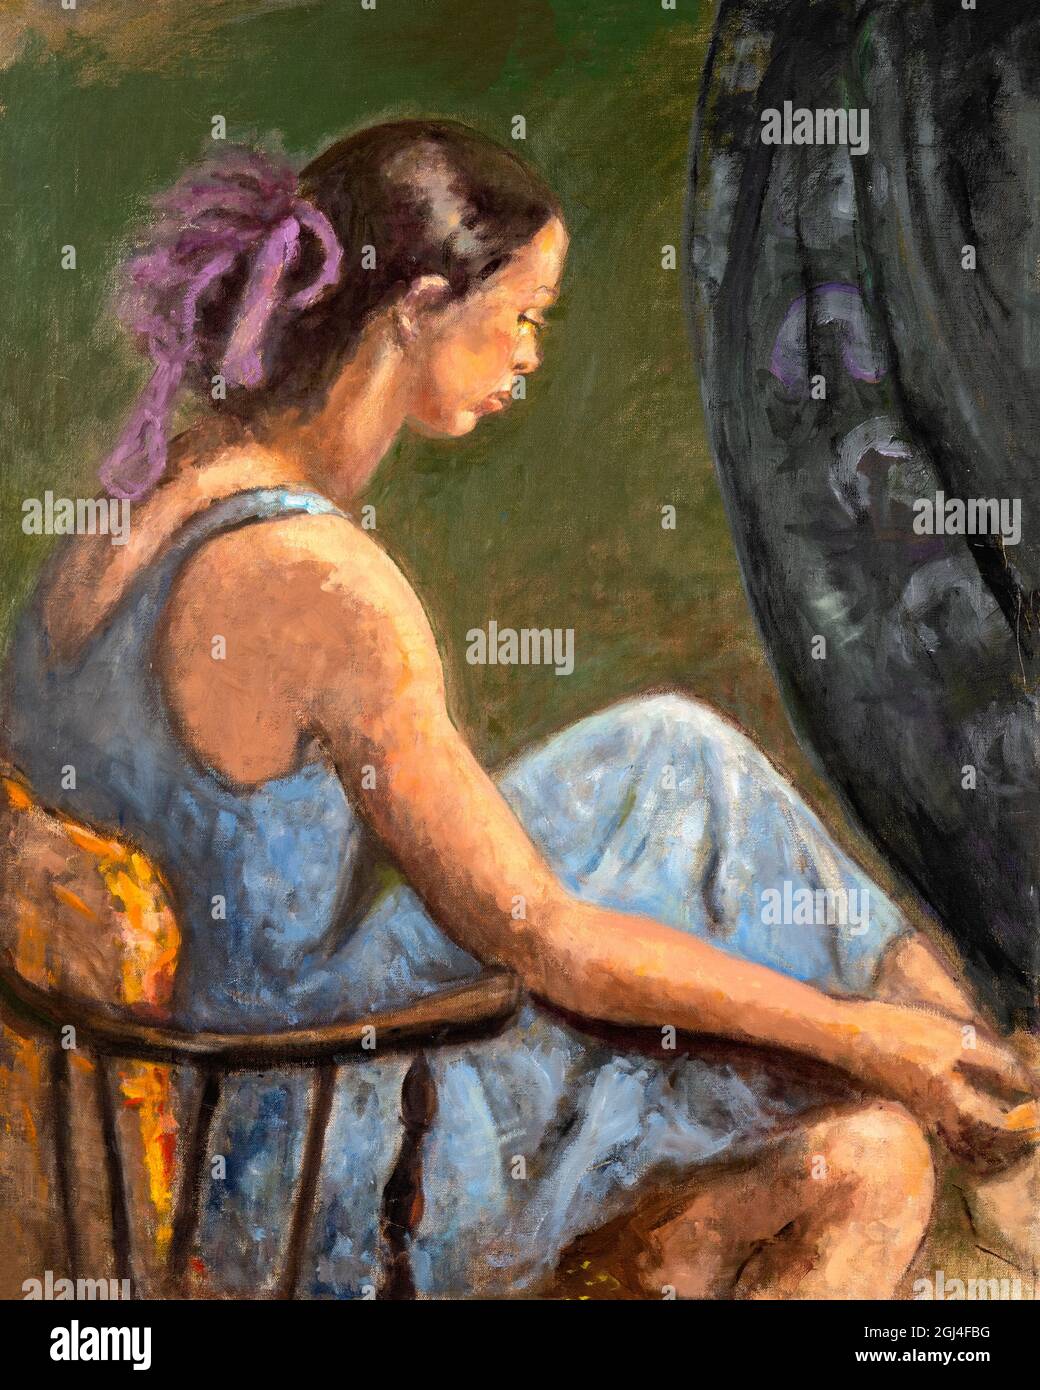 Original oil painting portrait of young woman sitting on a chair. Stock Photo